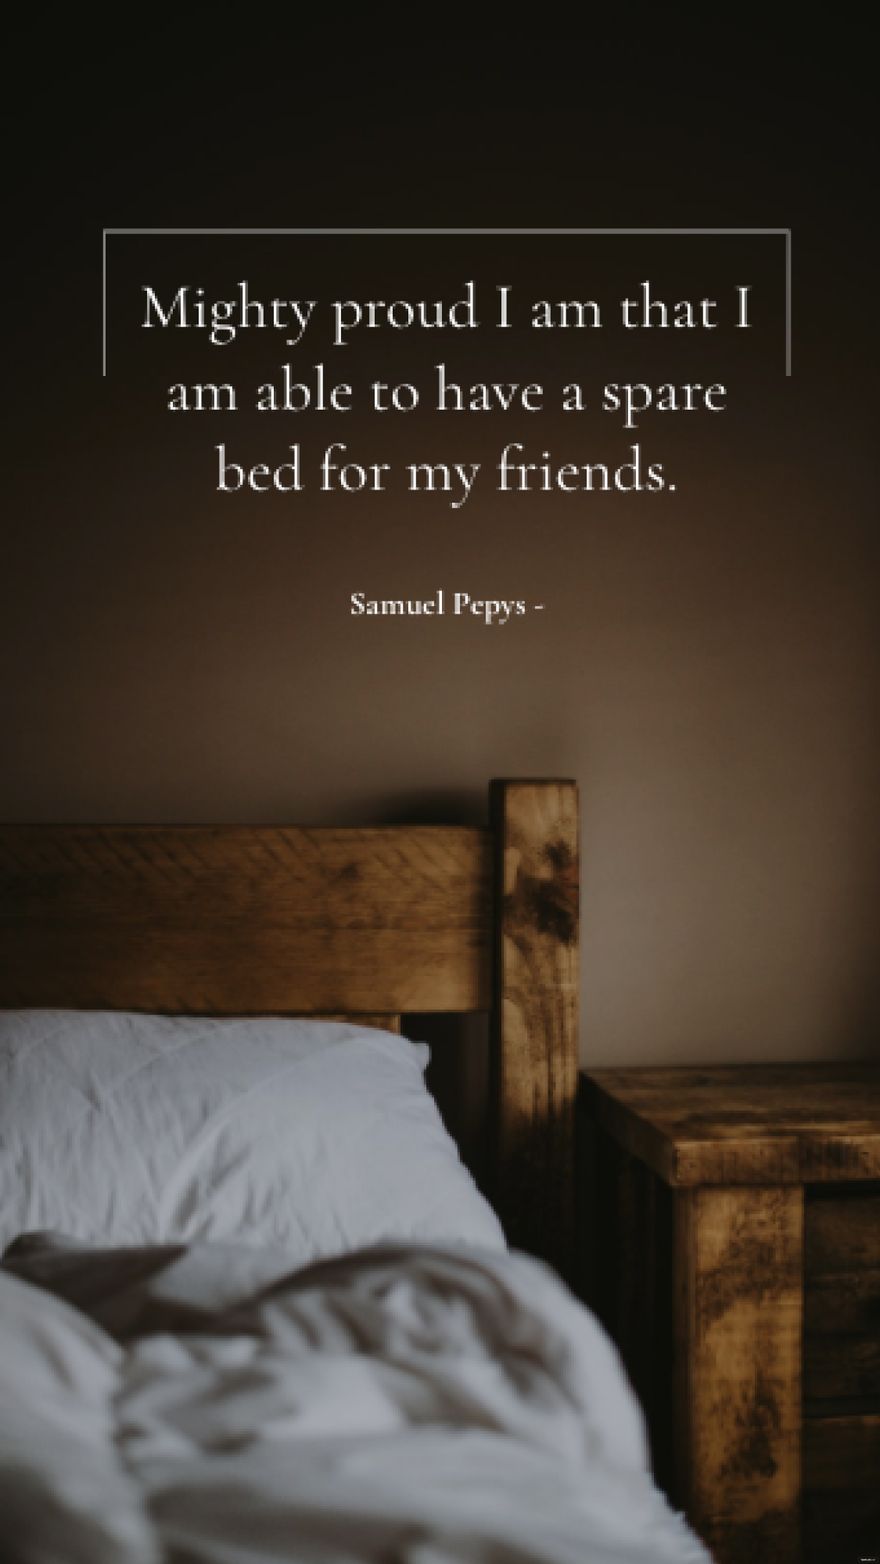 Samuel Pepys - Mighty proud I am that I am able to have a spare bed for my friends.